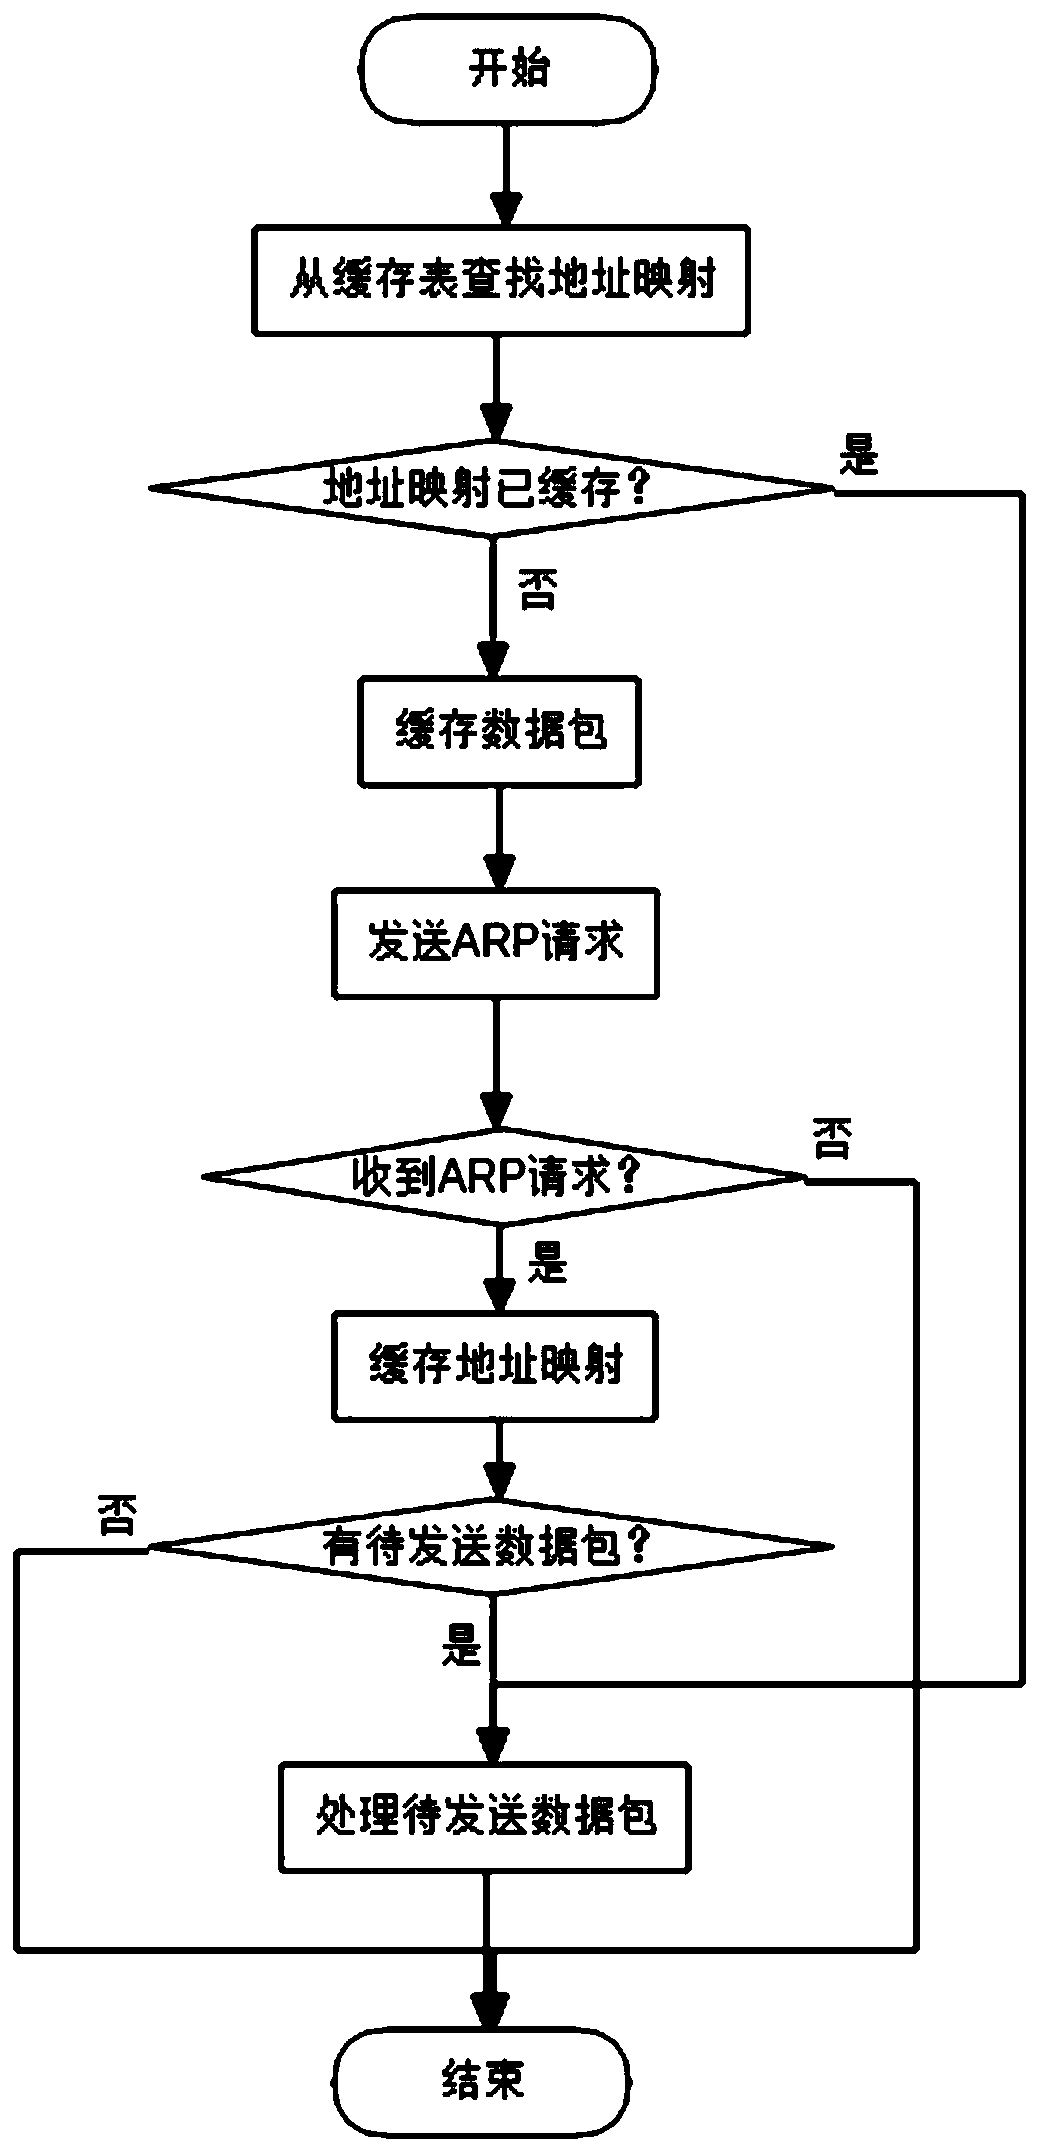 Computer network principle teaching system based on libpcap